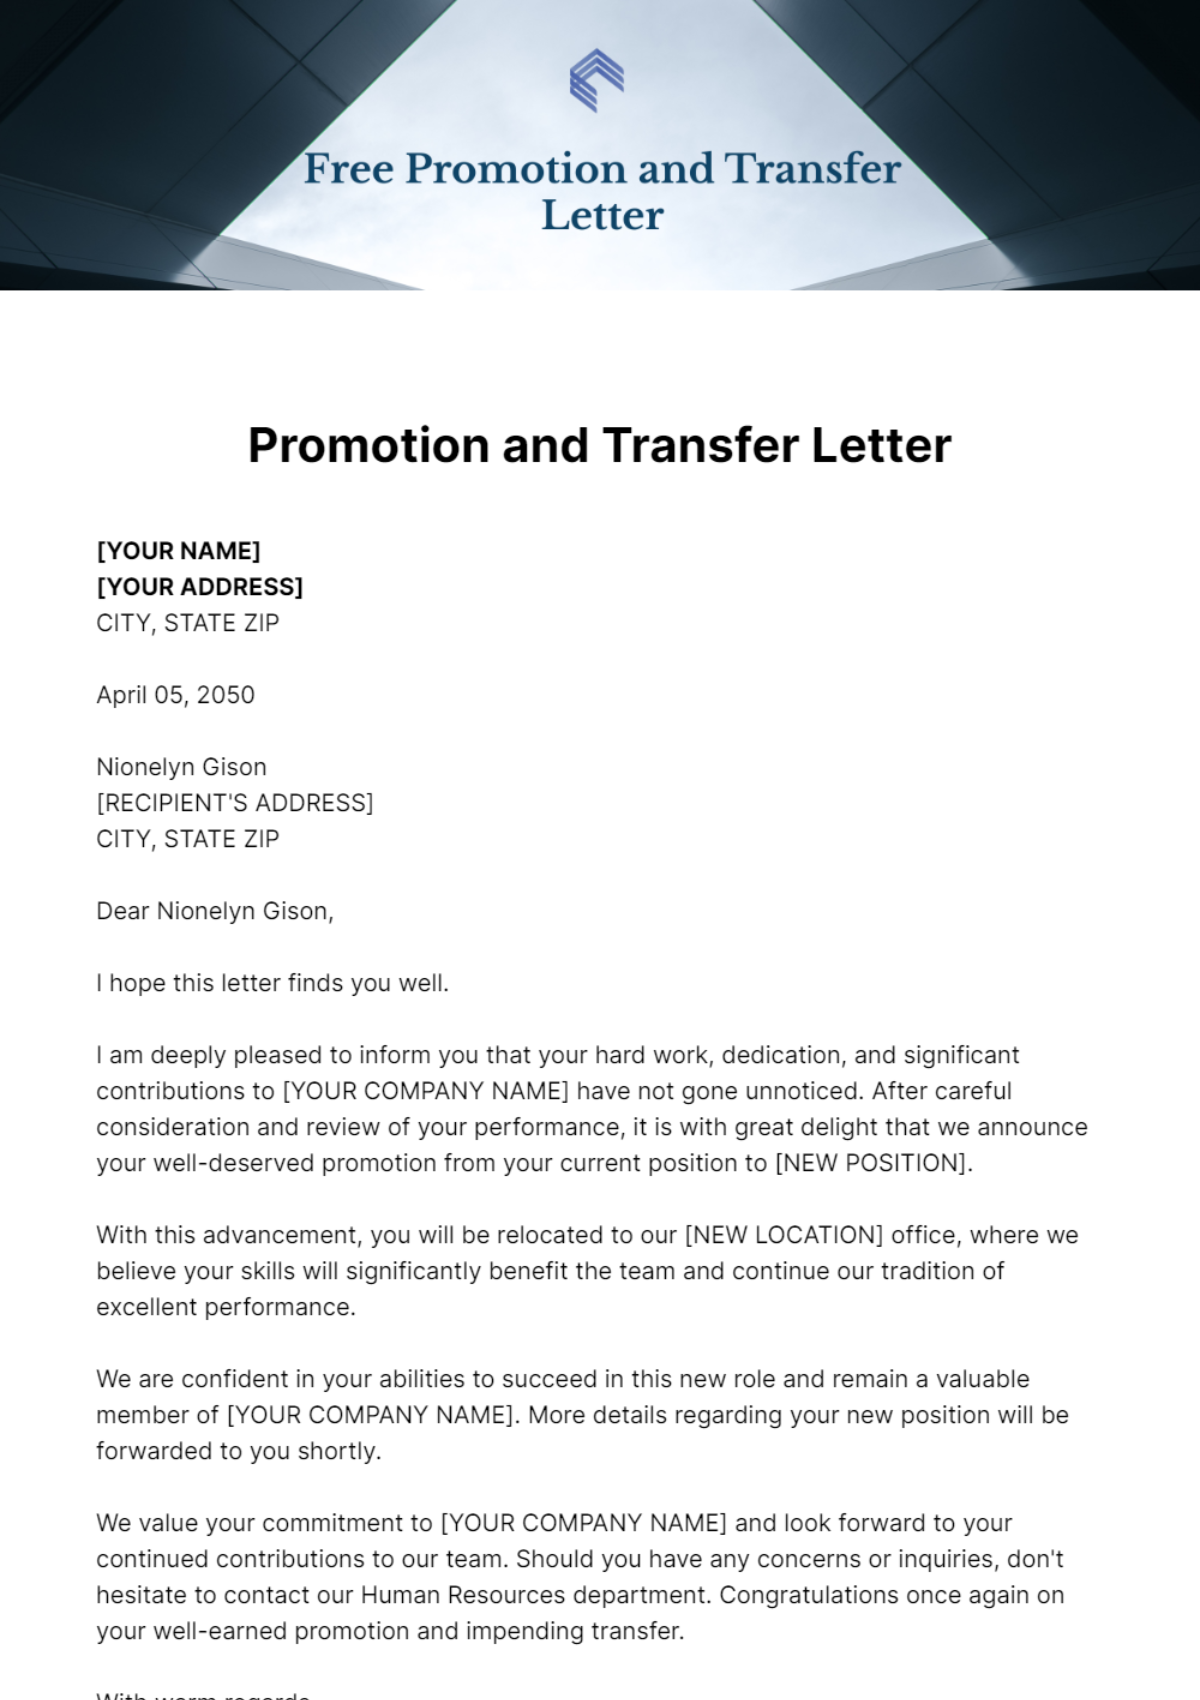 Promotion and Transfer Letter Template